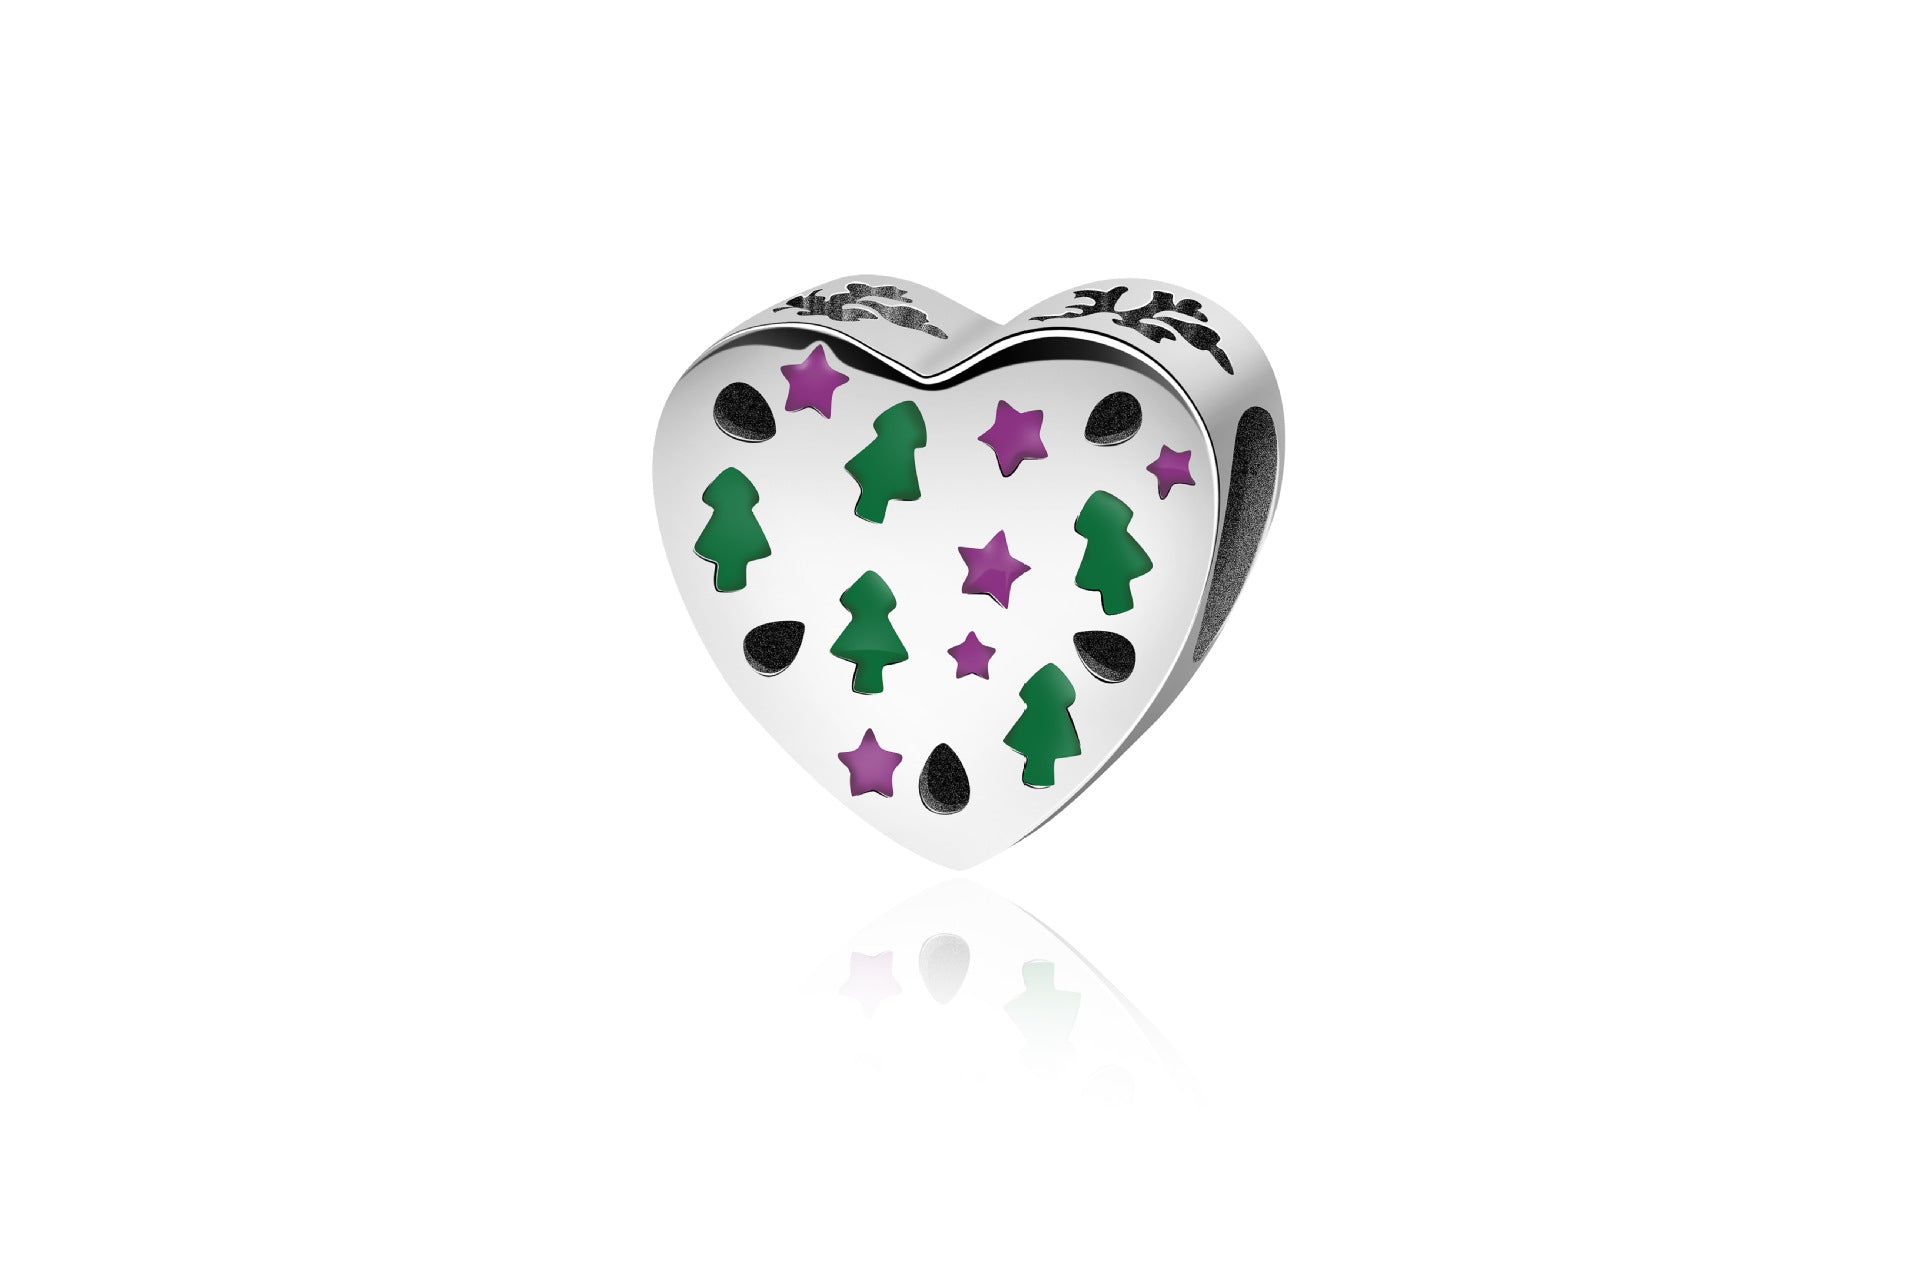 One Piece 925 Sterling Silver Heart Bead Charm - Ryzela